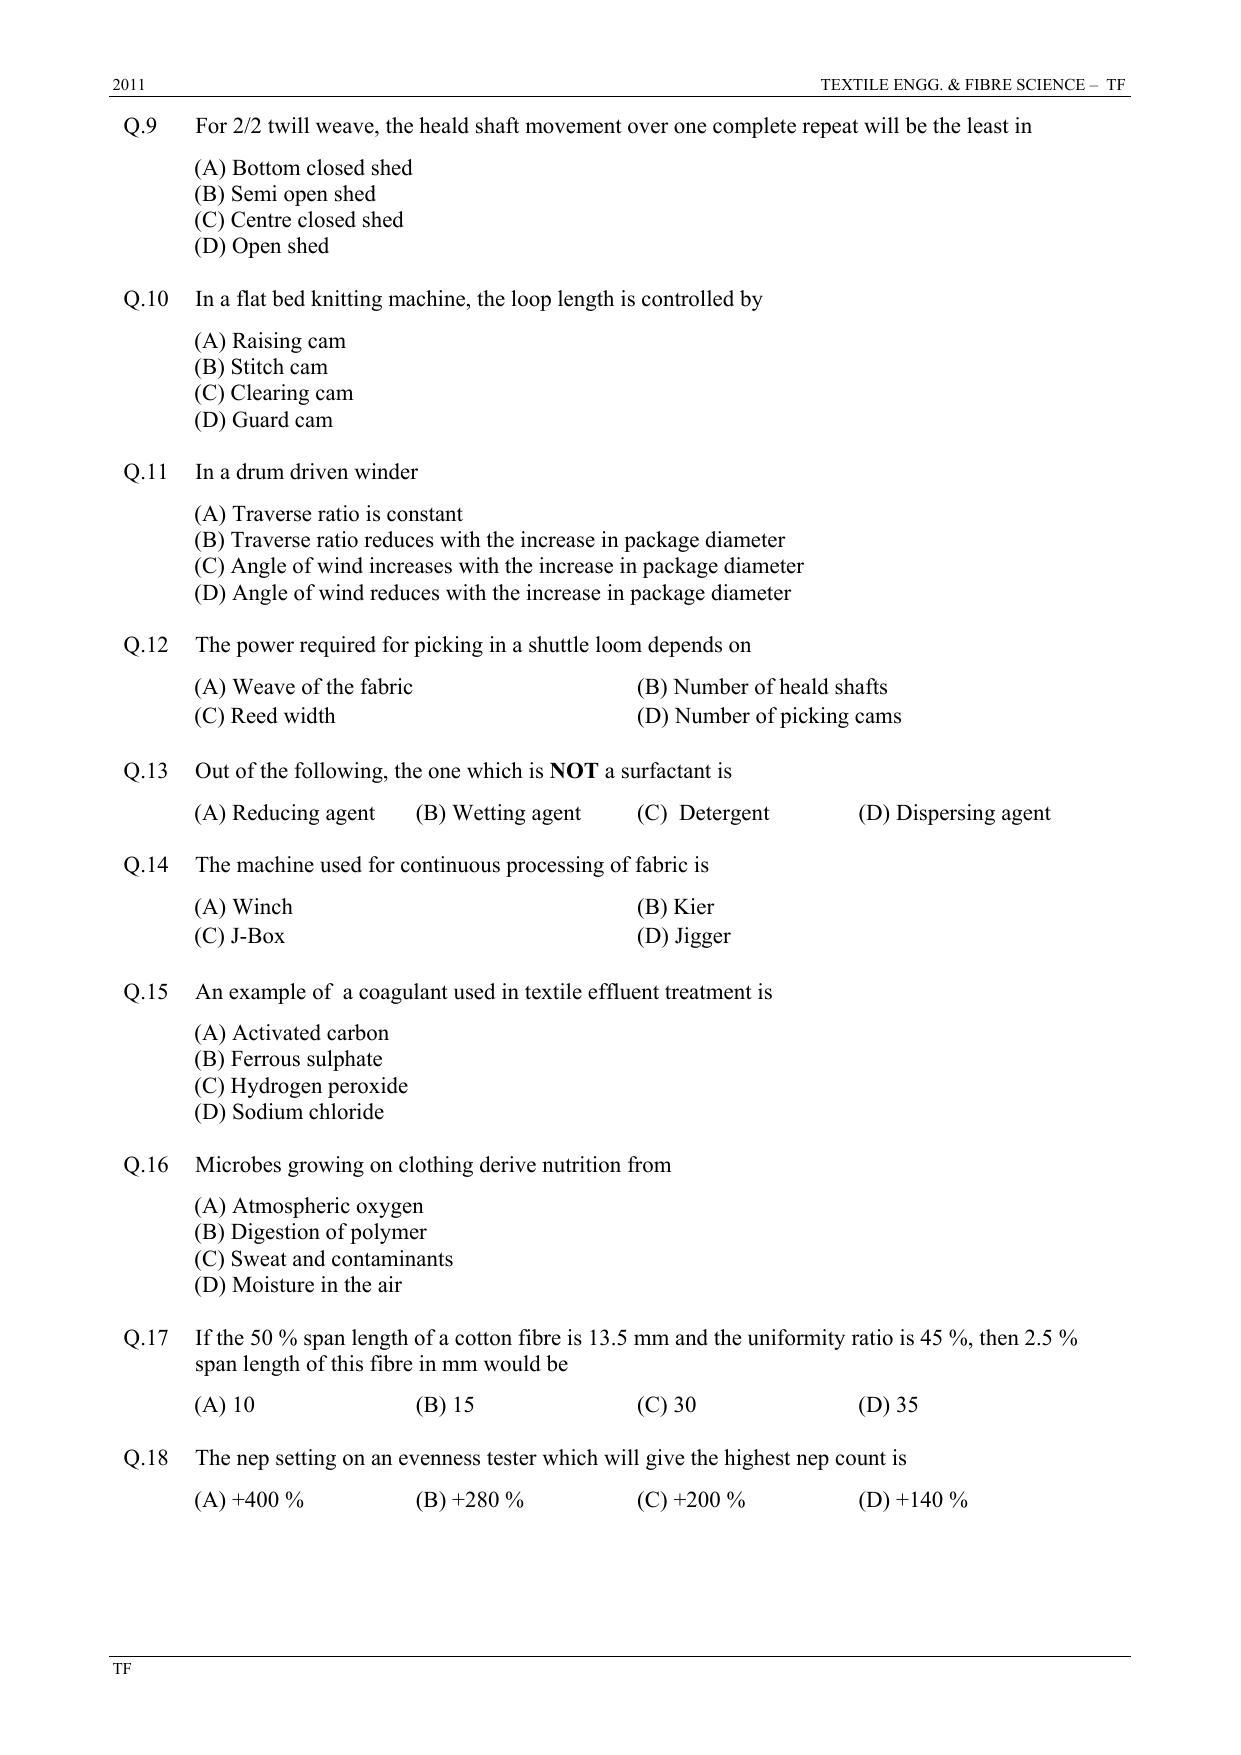 GATE 2011 Textile Engineering and Fibre Science (TF) Question Paper with Answer Key - Page 3